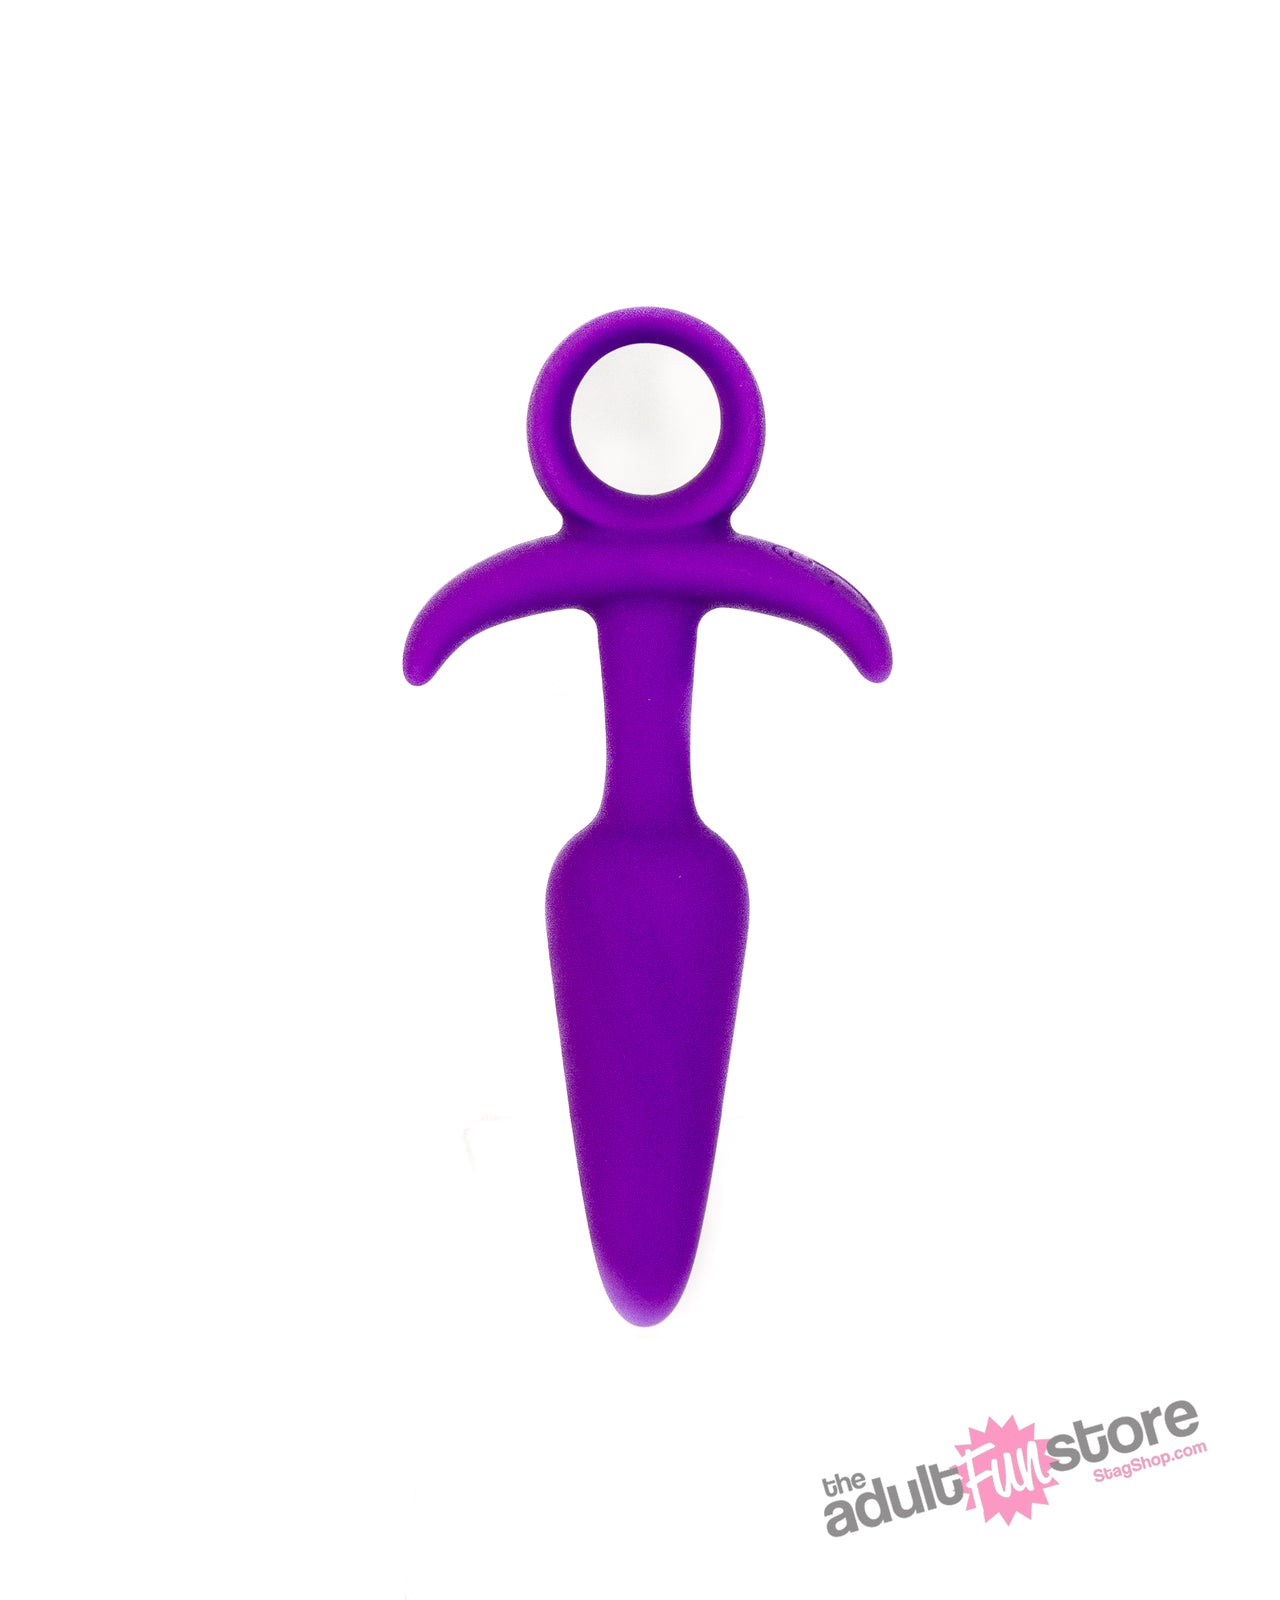 NS Novelties - INYA - Prince Butt Plug - Assorted Sizes & Colours - Stag Shop